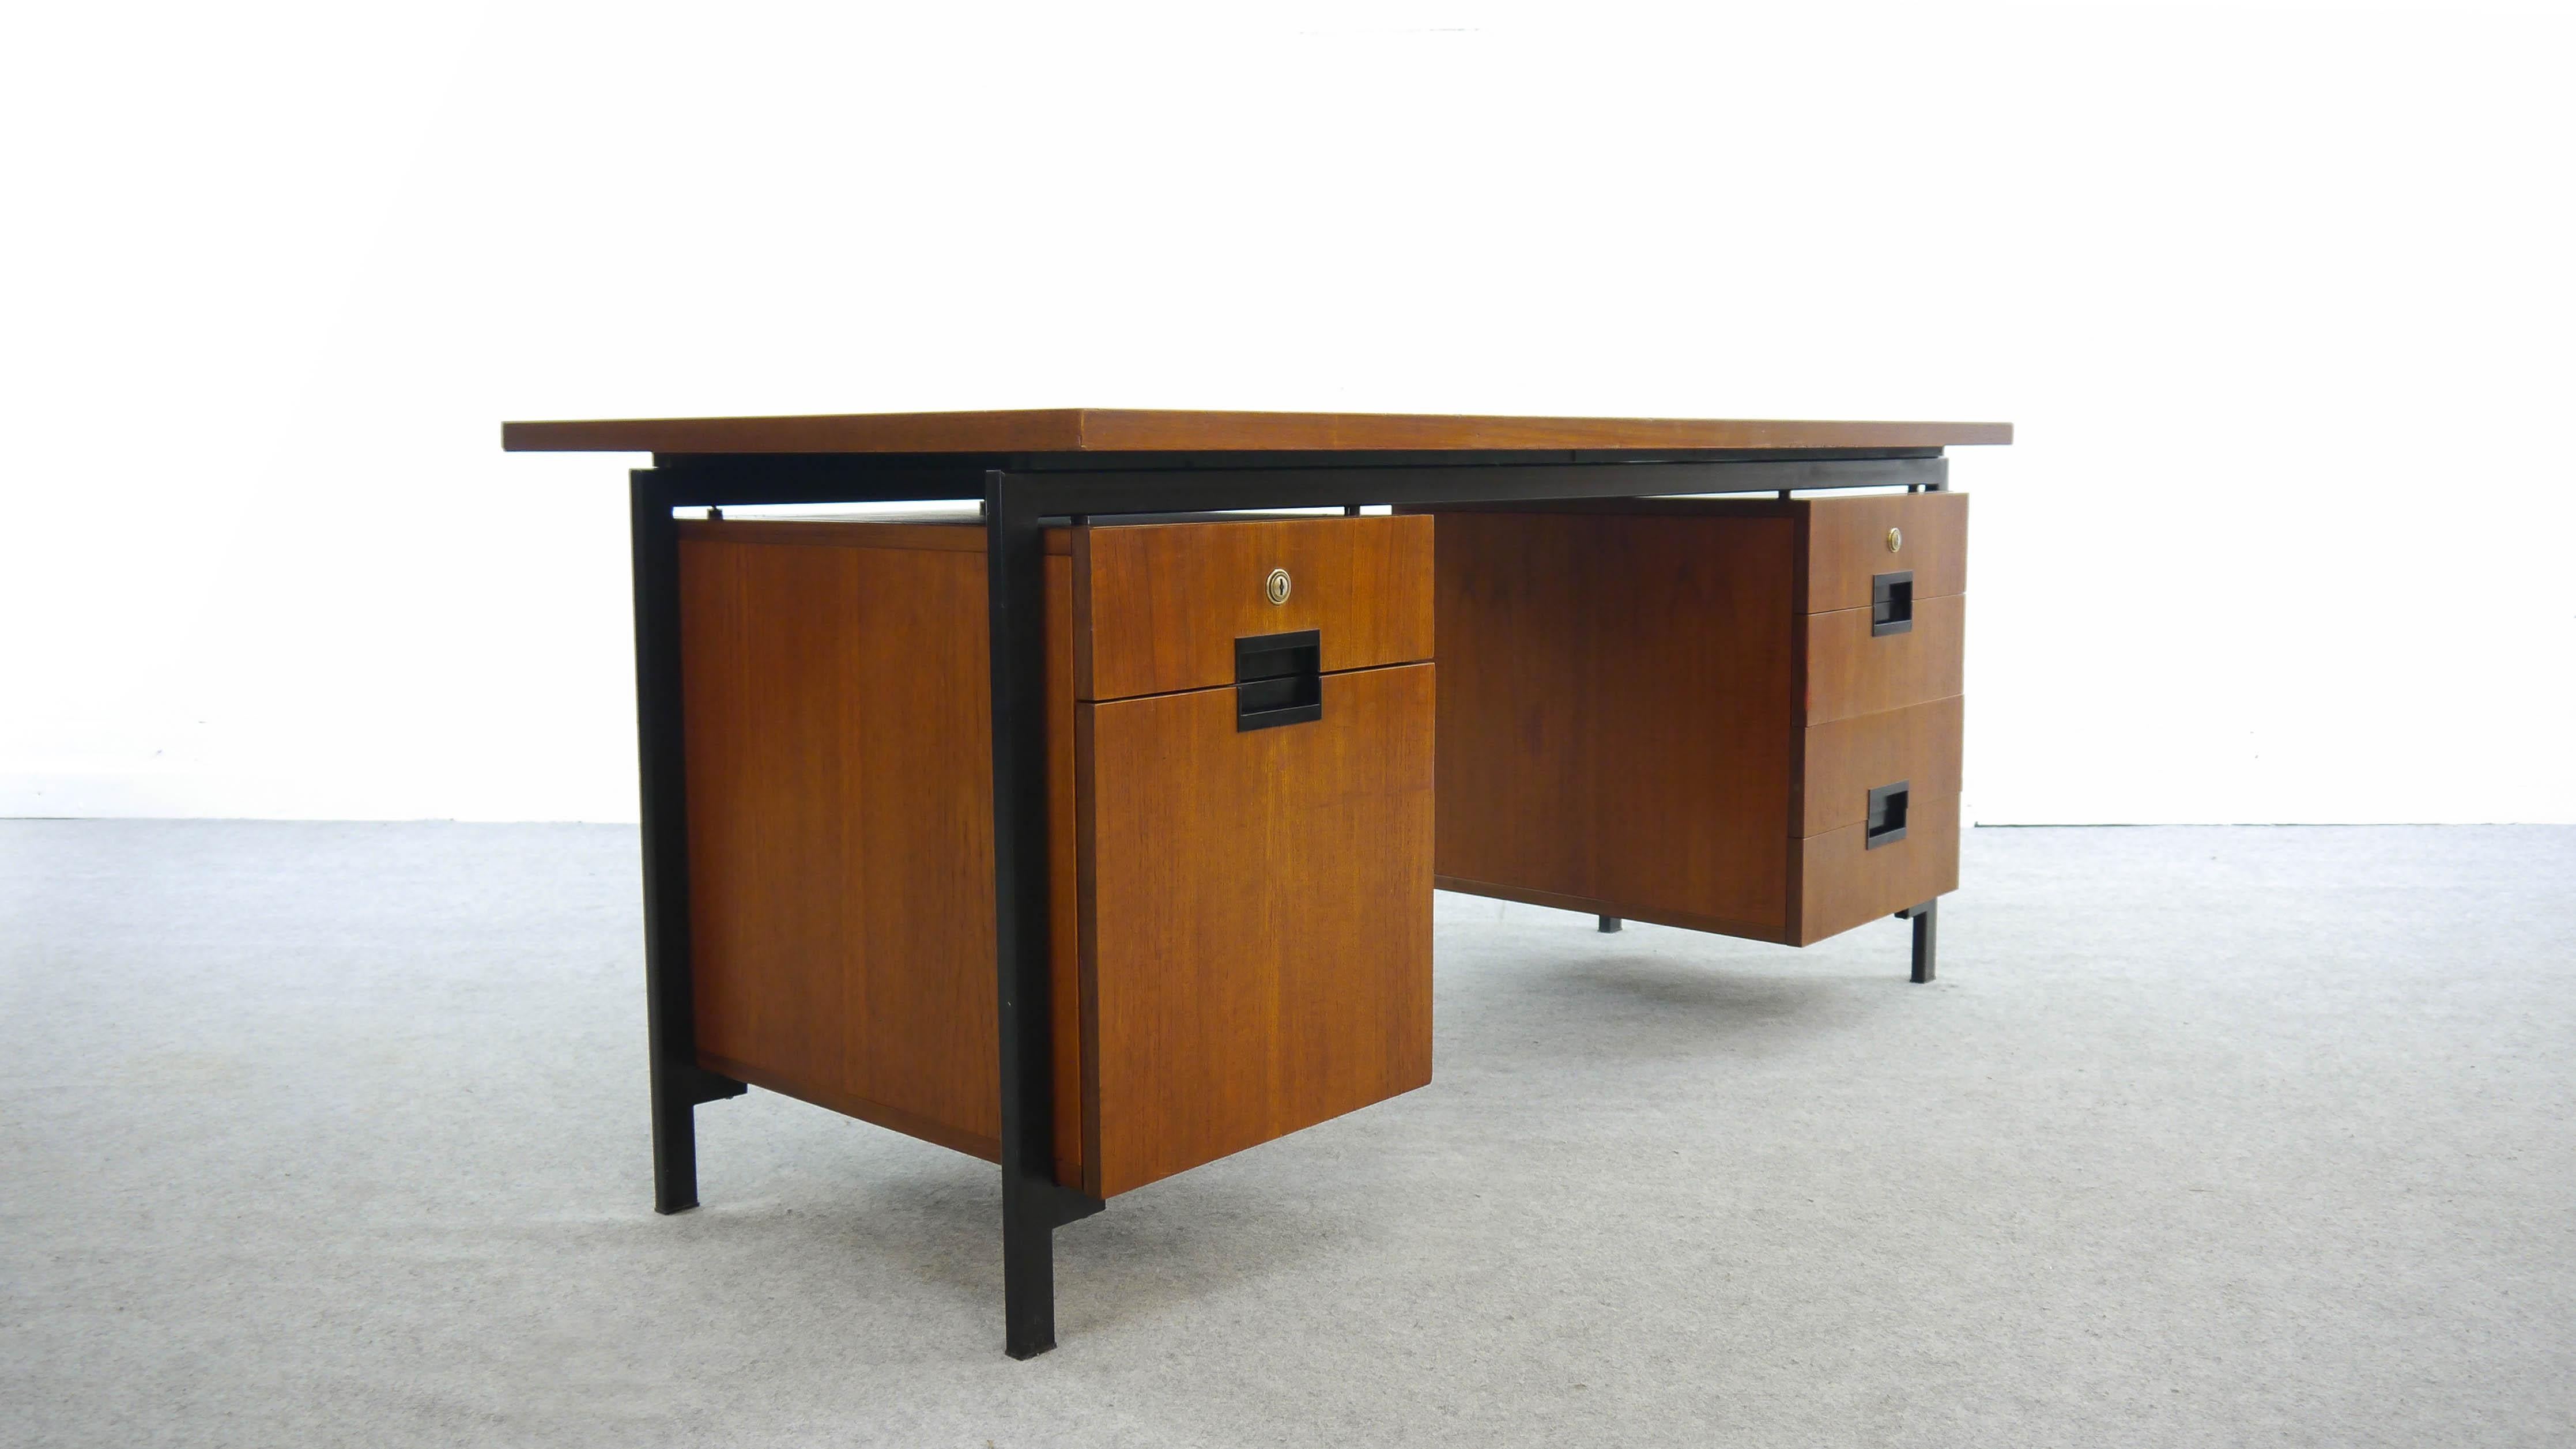 Teak desk from the 1950s, designed by Cees Braakman manufactured by Pastoe, Netherlands.
Blackend steelframe with suspended teakchests. 5 drawers, 1-drawer for hanging files.